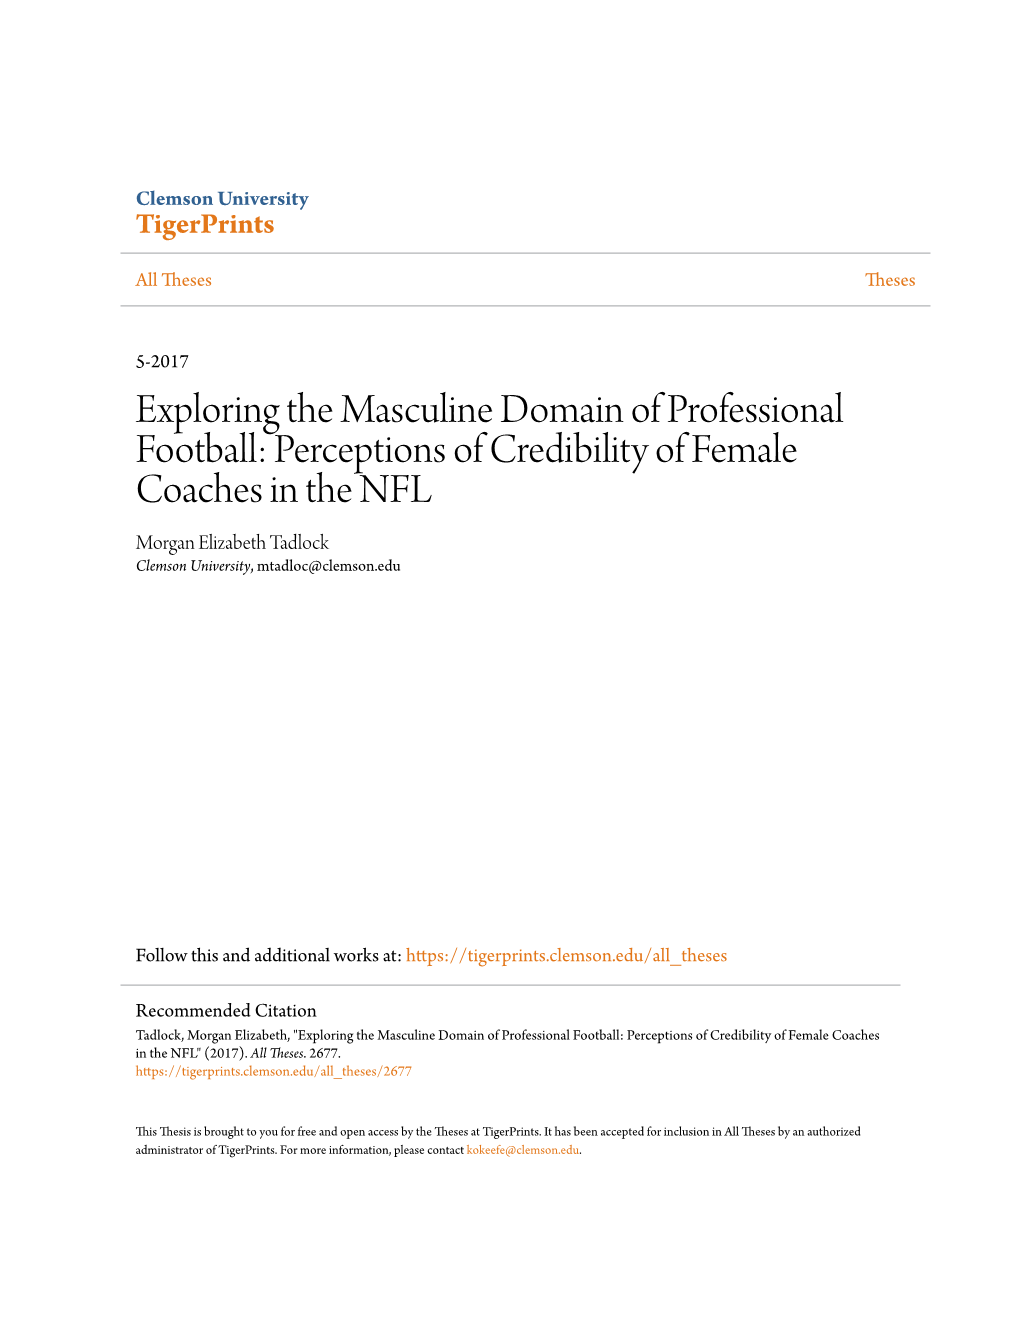 Exploring the Masculine Domain of Professional Football: Perceptions of Credibility of Female Coaches in The